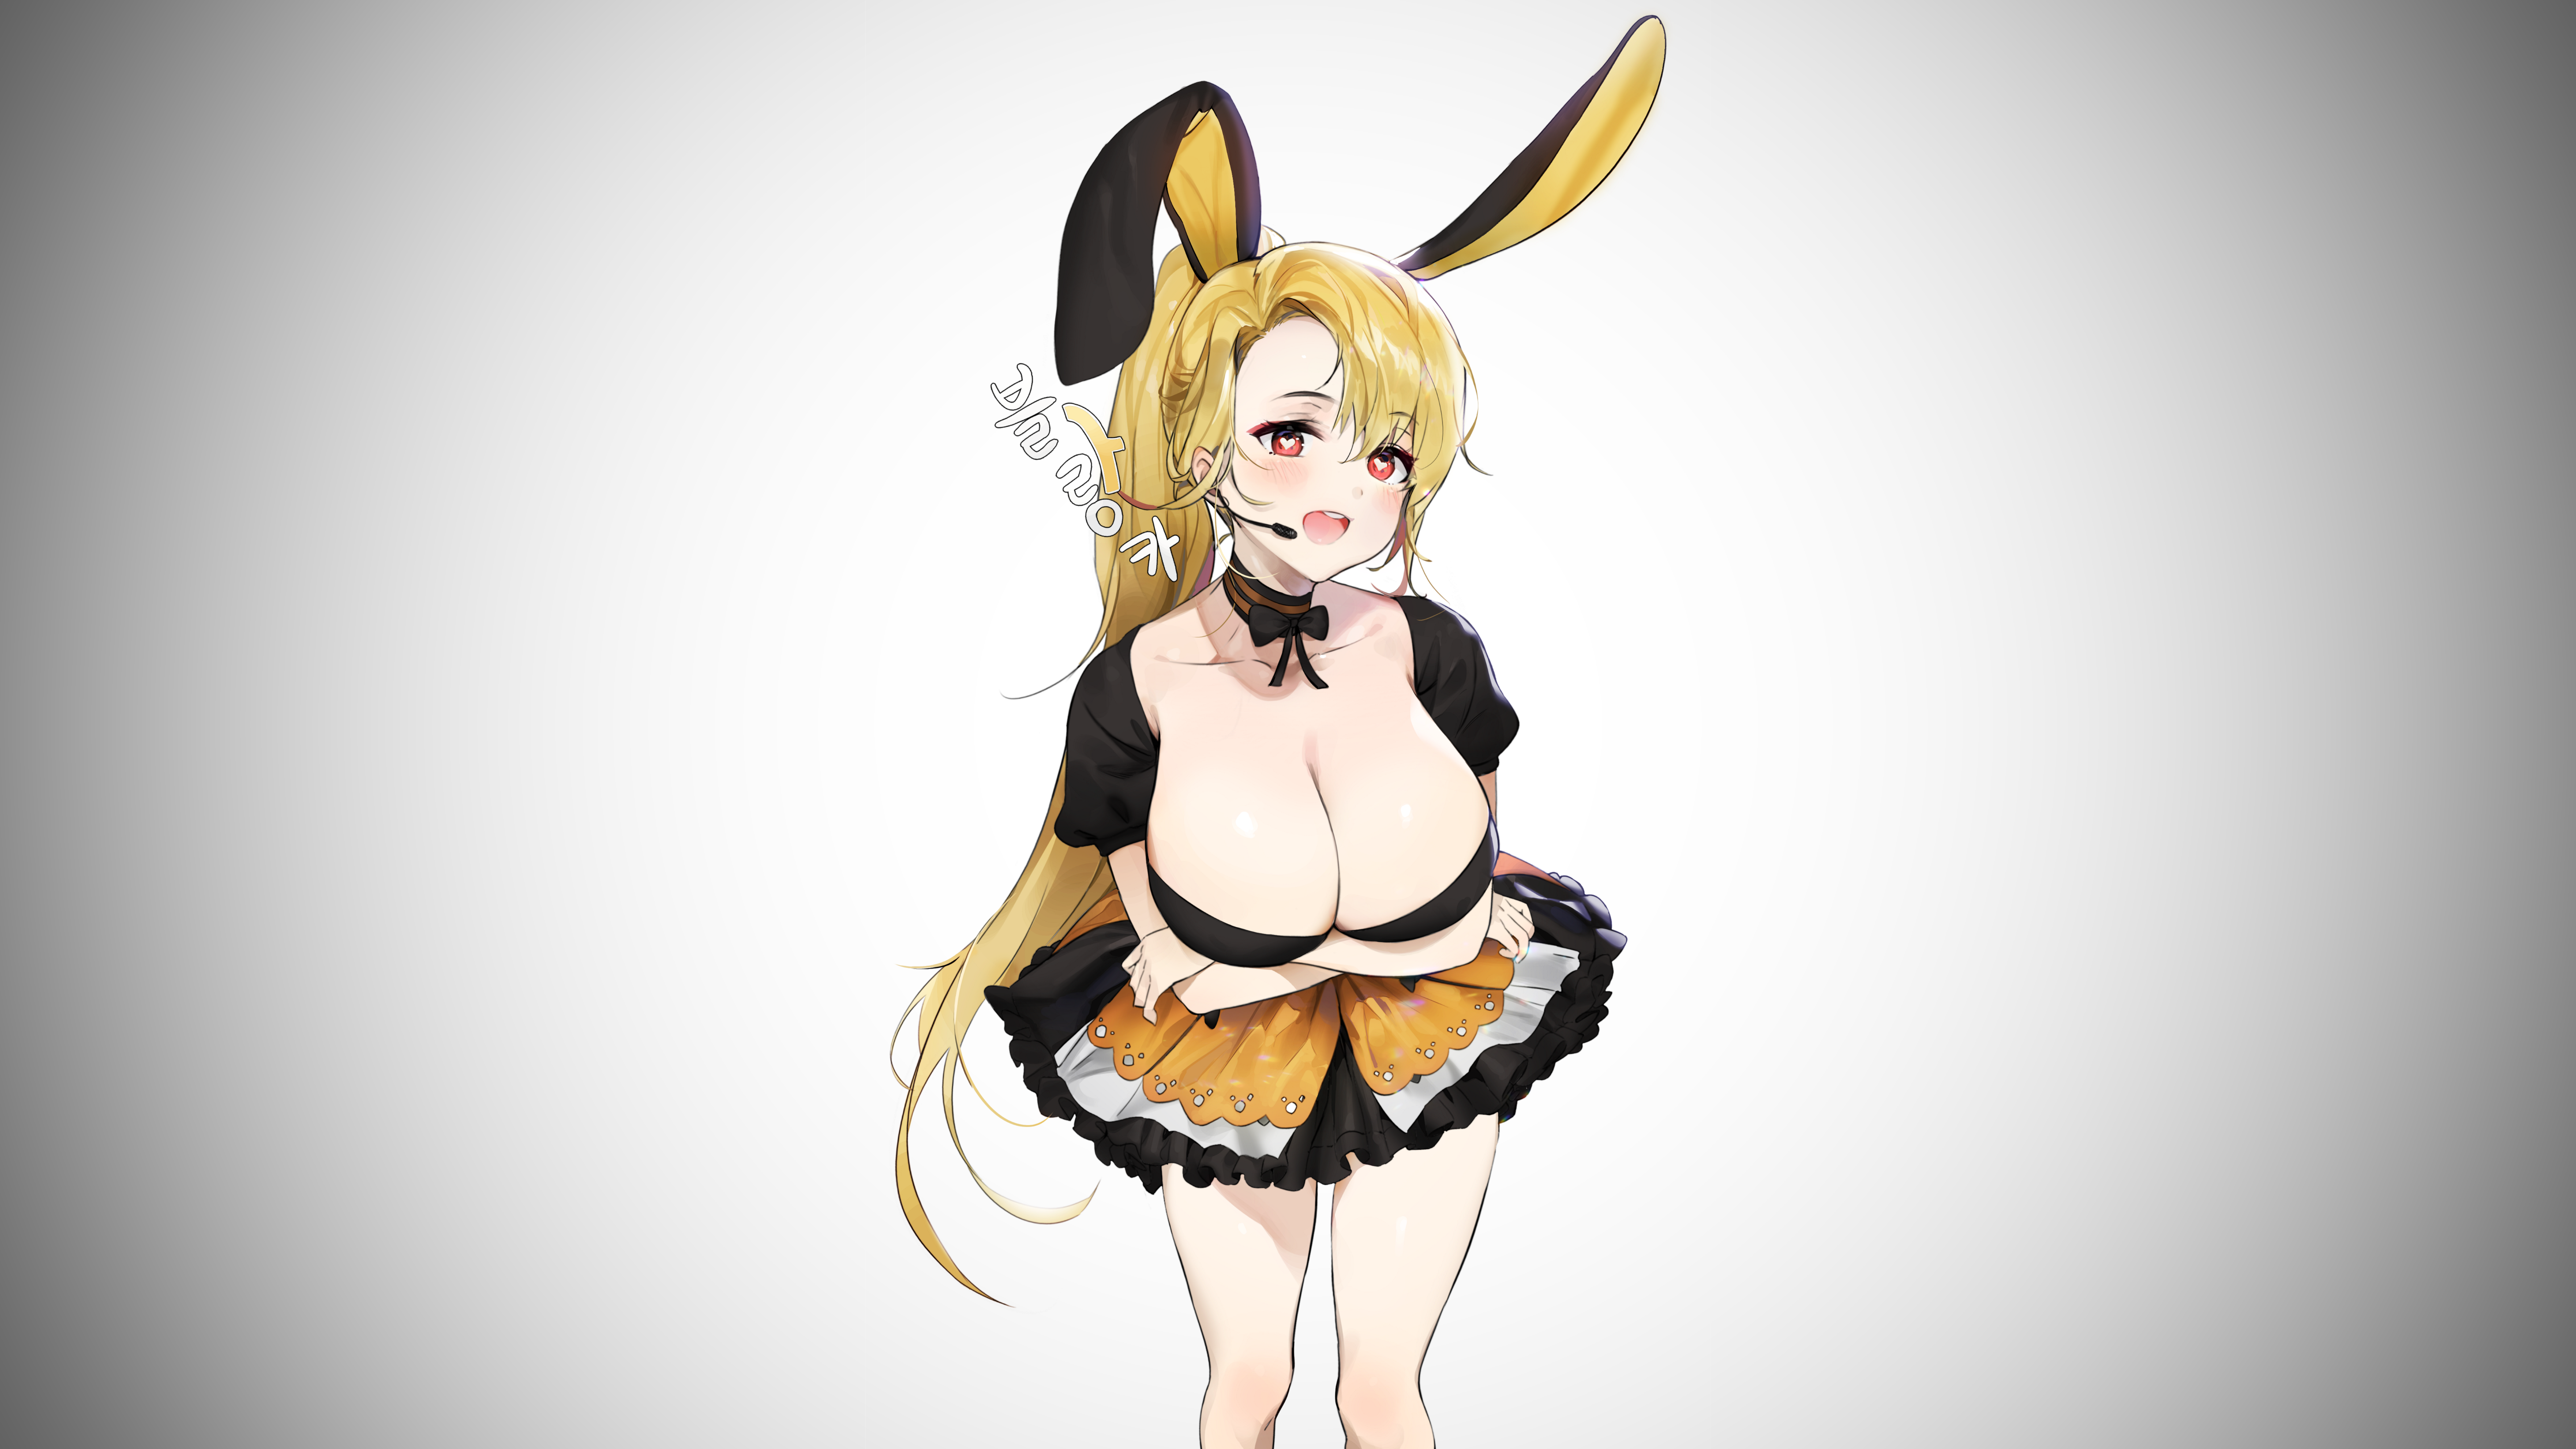 Anime 7111x4000 anime anime girls original characters bunny girl bunny ears blonde ponytail long hair red eyes looking at viewer blushing happy portrait big boobs cleavage dress arms crossed necklace microphone white background simple background vignette artwork digital art drawing illustration 2D